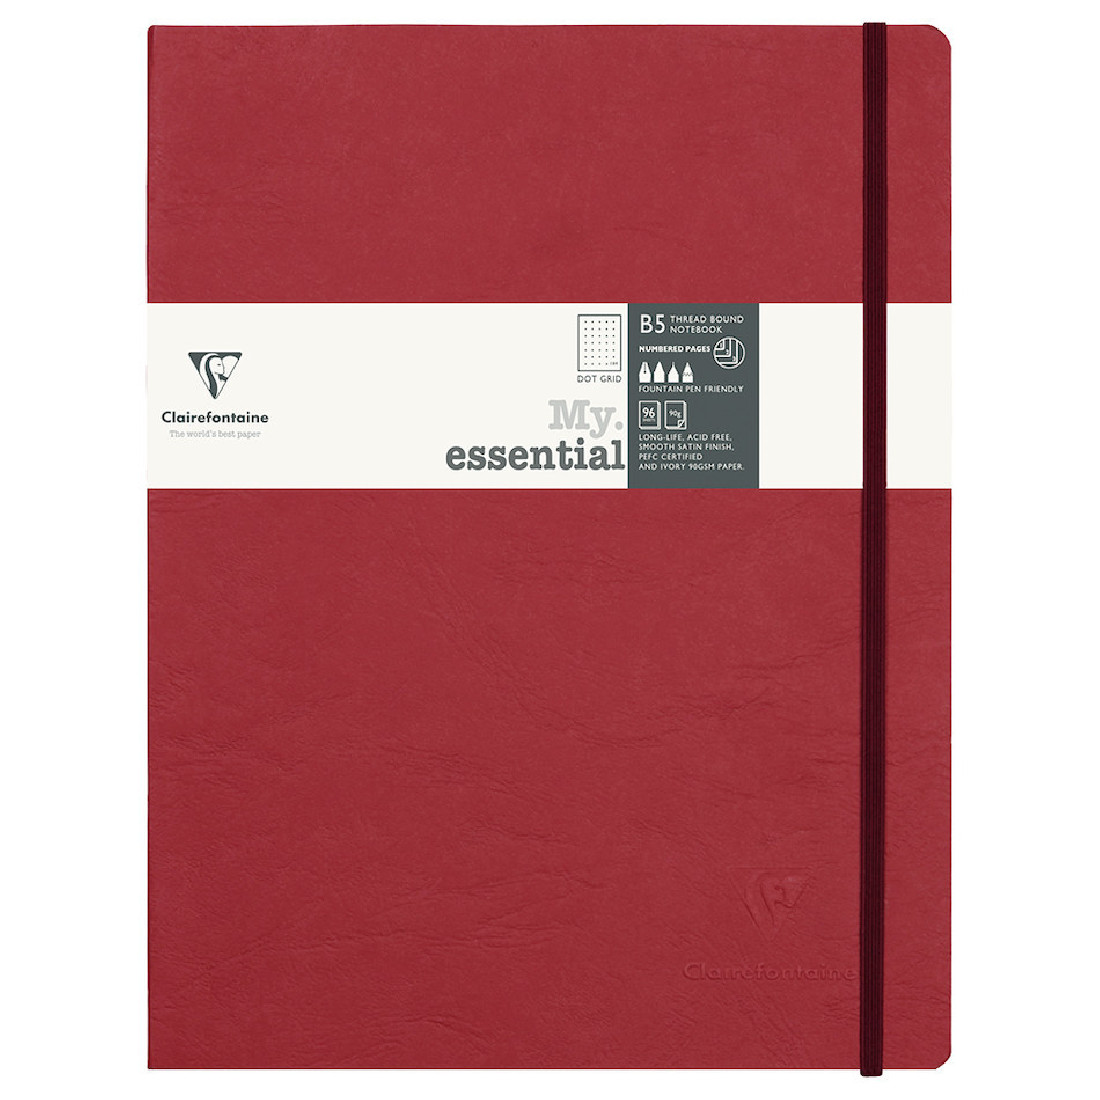 Clairefontaine notebook my.essential B5 19X25 cm, red, dotted,  90g